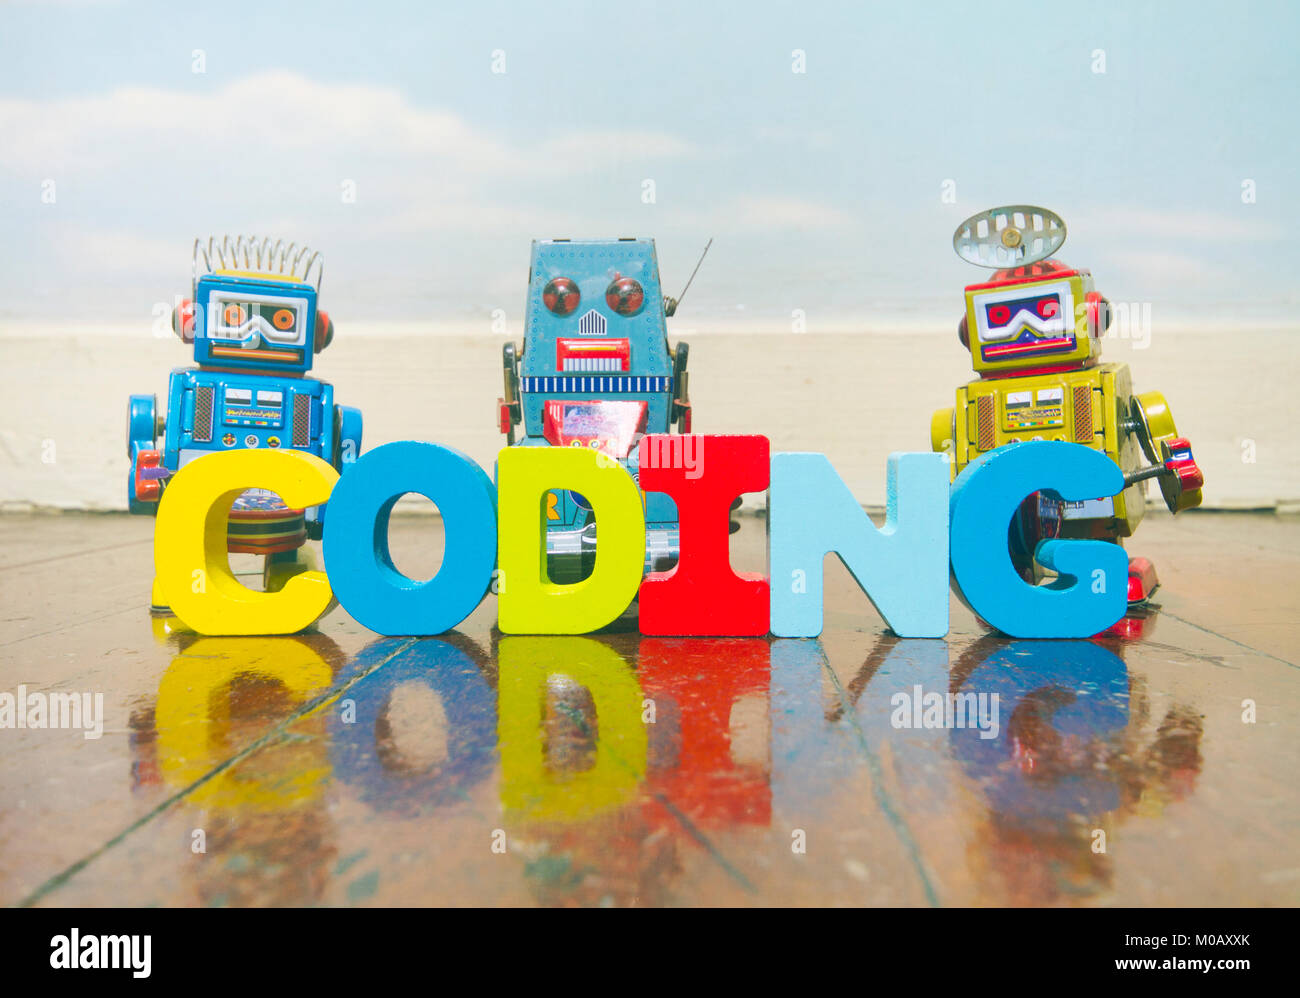 the word coding wit wooden letters on a old wooden floor with retro robot toys Stock Photo